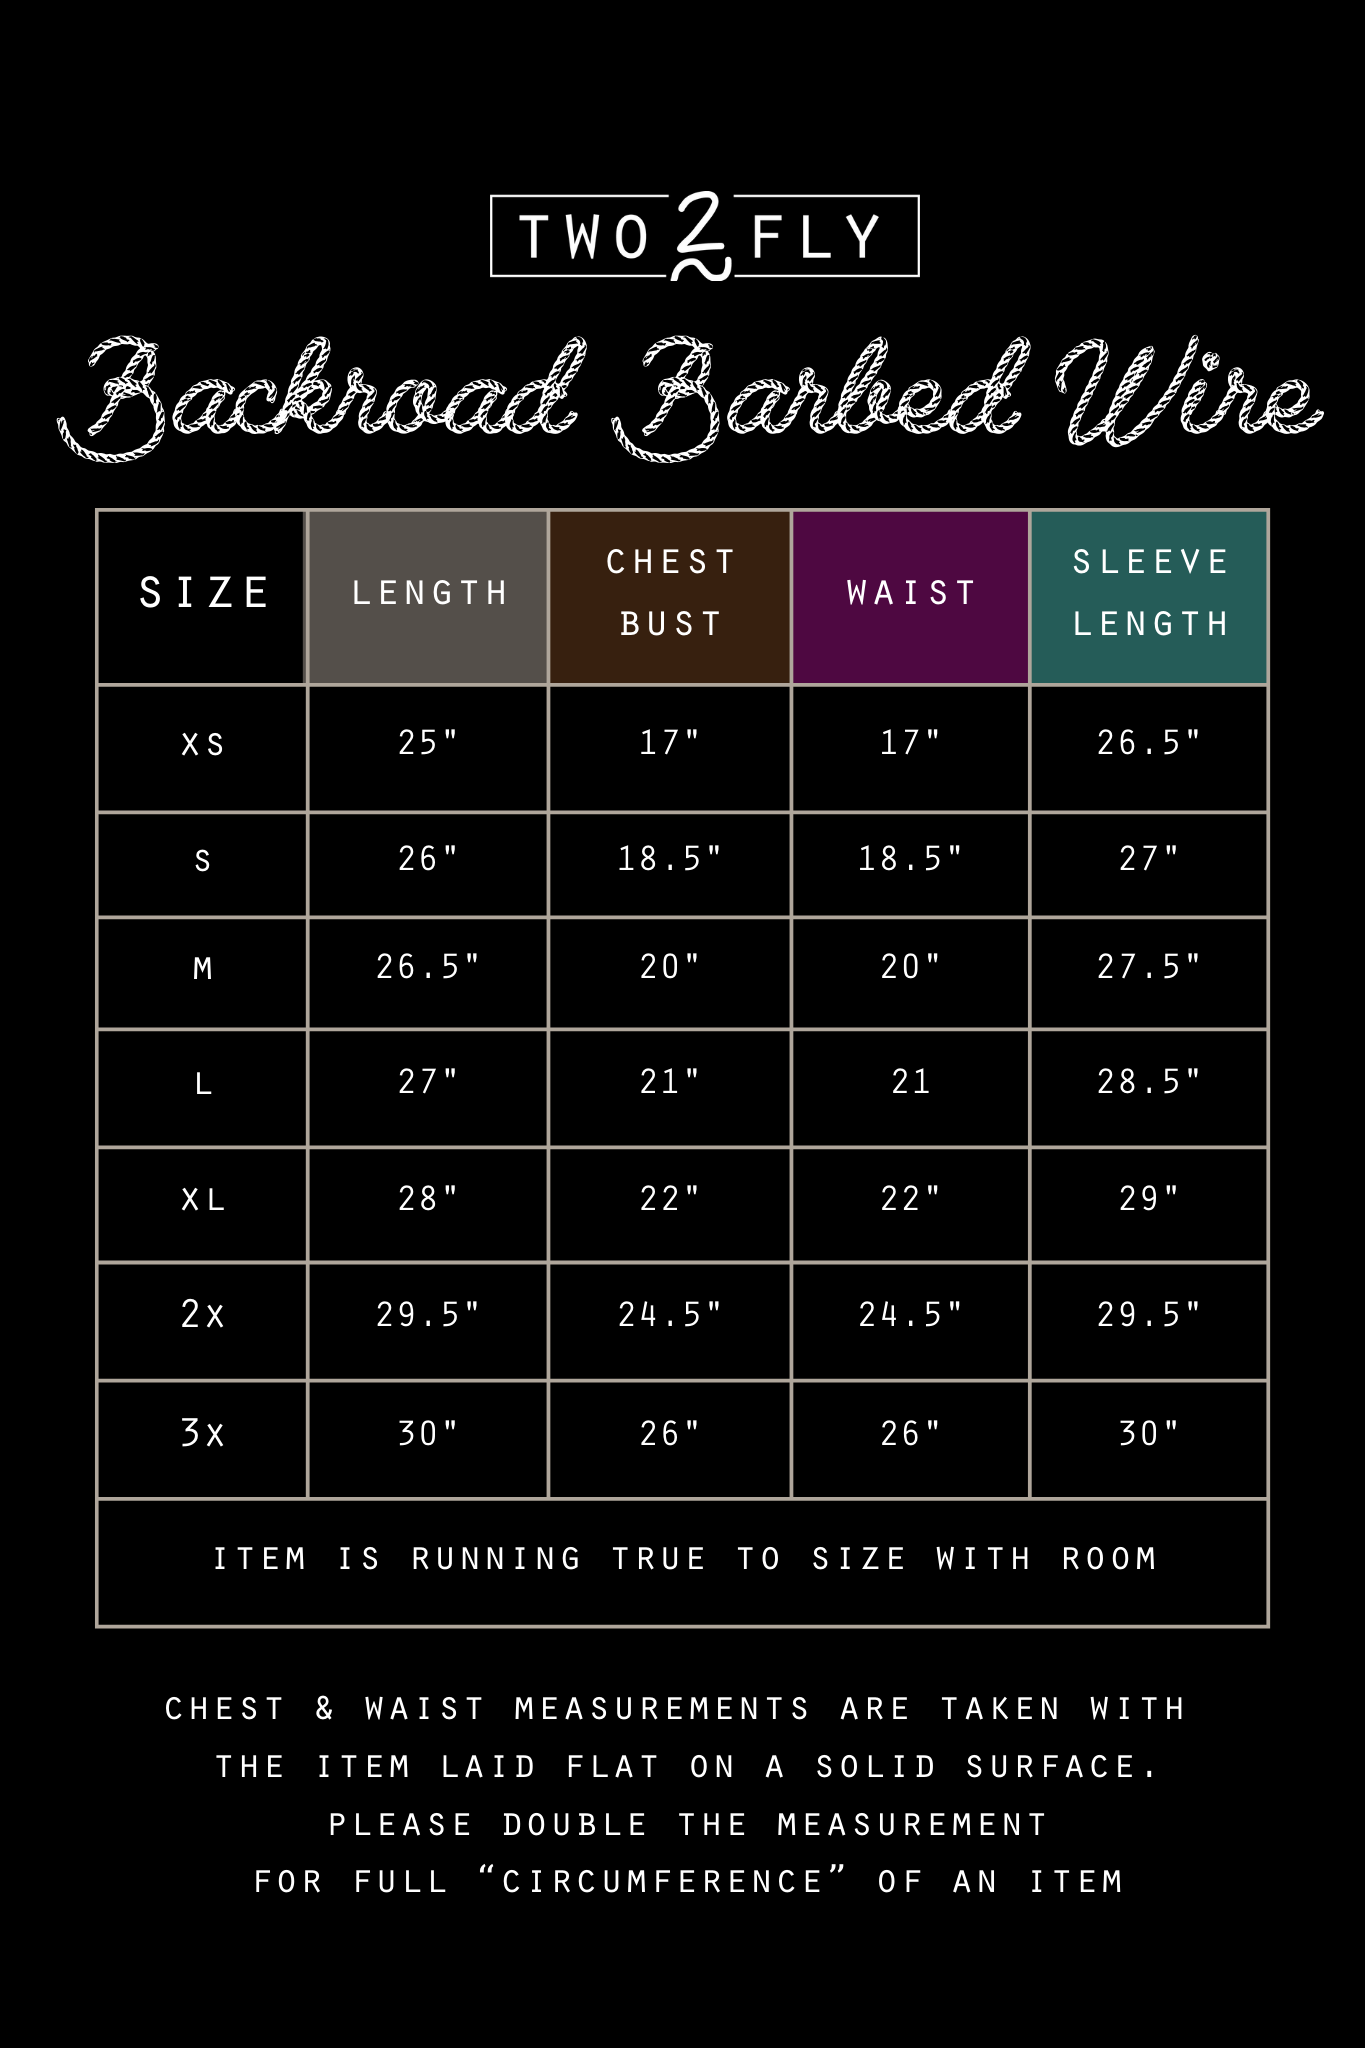 Backroad Barbed Wire Top - Size Small